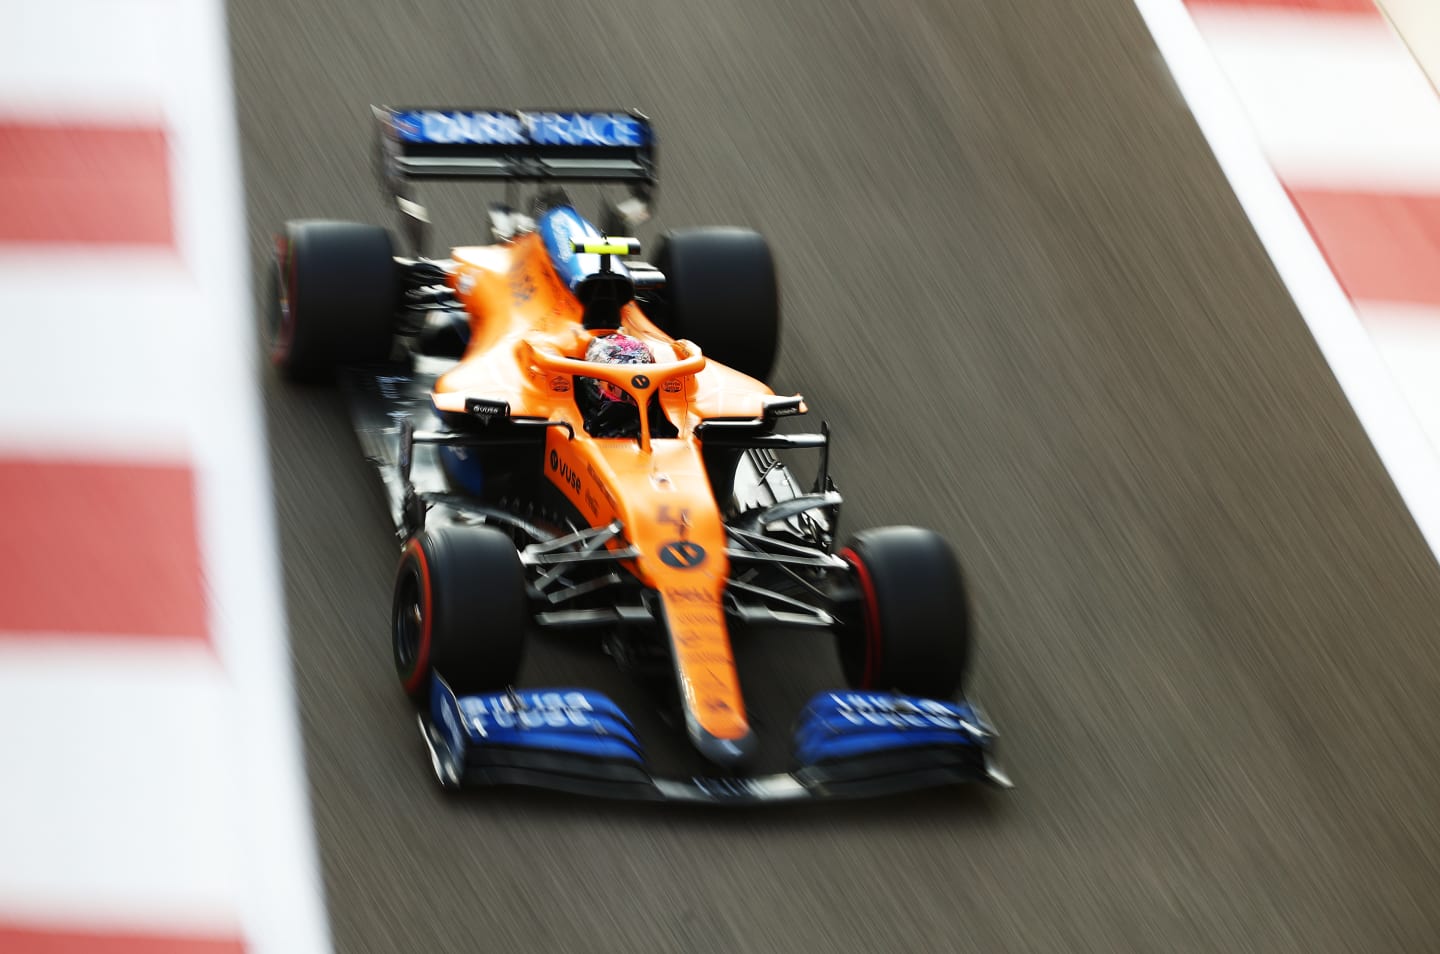 ABU DHABI, UNITED ARAB EMIRATES - DECEMBER 13: Lando Norris of Great Britain driving the (4) McLaren F1 Team MCL35 Renault on his way to the grid prior to the F1 Grand Prix of Abu Dhabi at Yas Marina Circuit on December 13, 2020 in Abu Dhabi, United Arab Emirates. (Photo by Bryn Lennon/Getty Images)